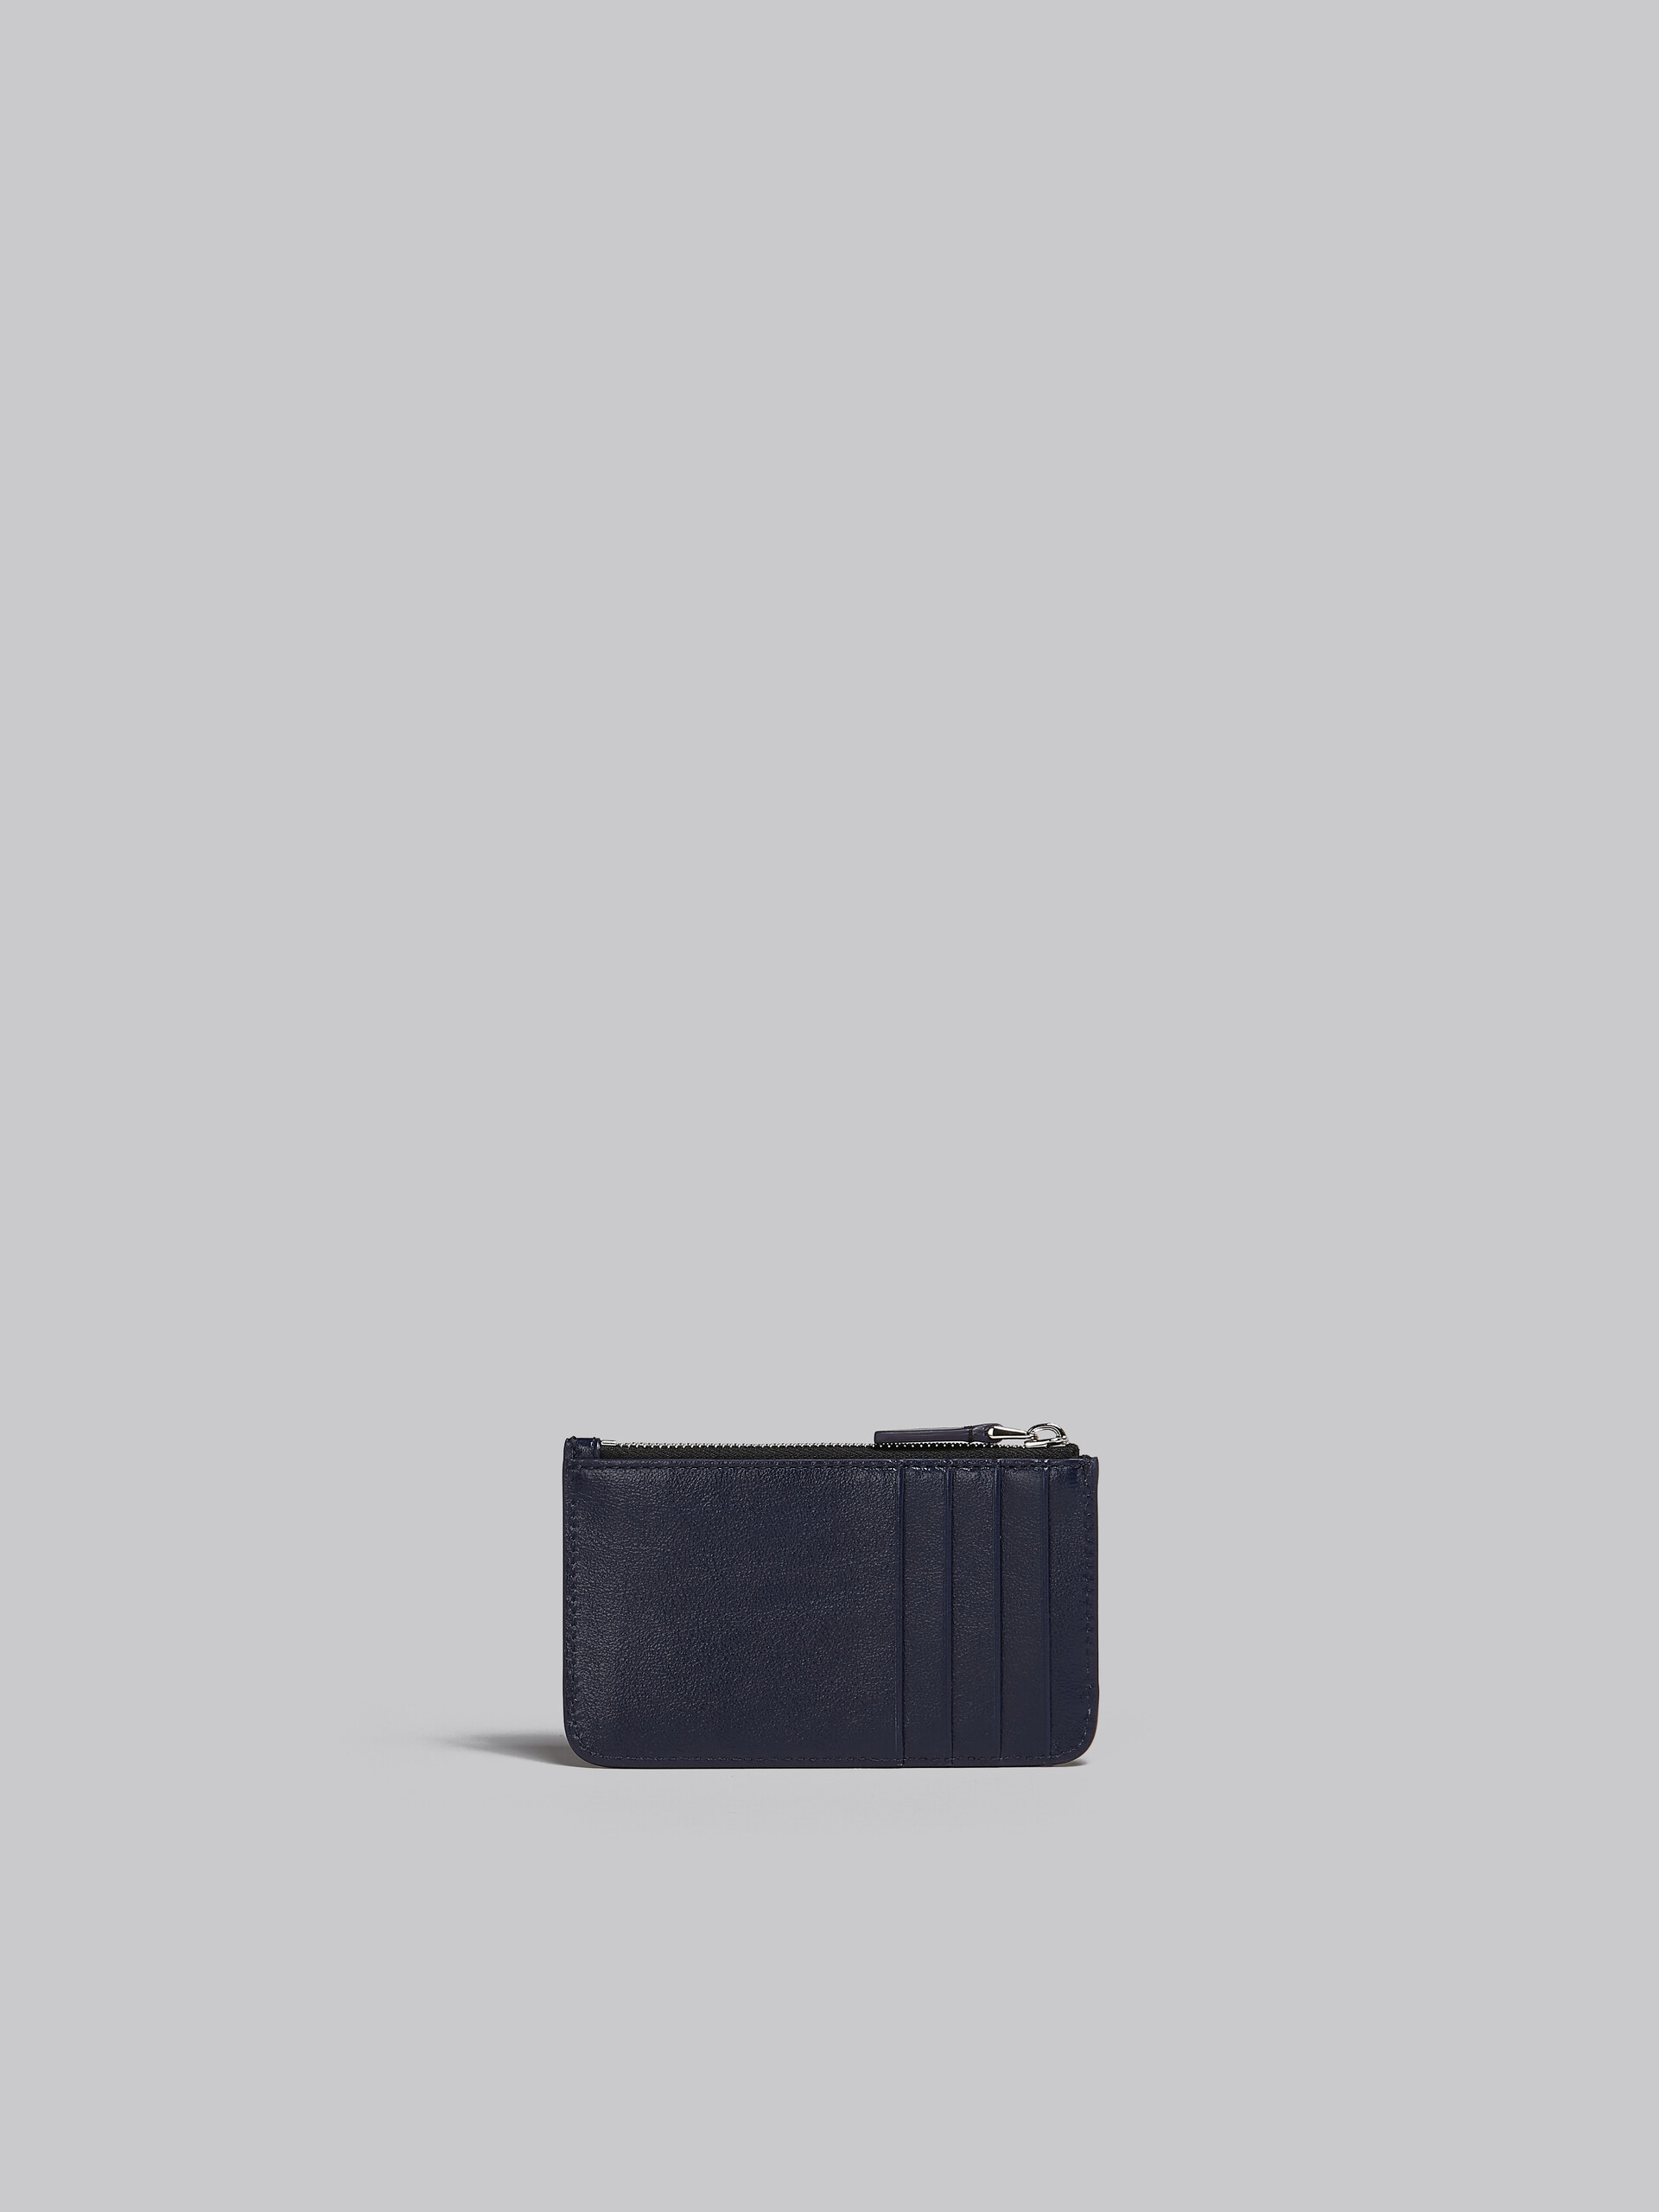 Navy blue and black leather card case